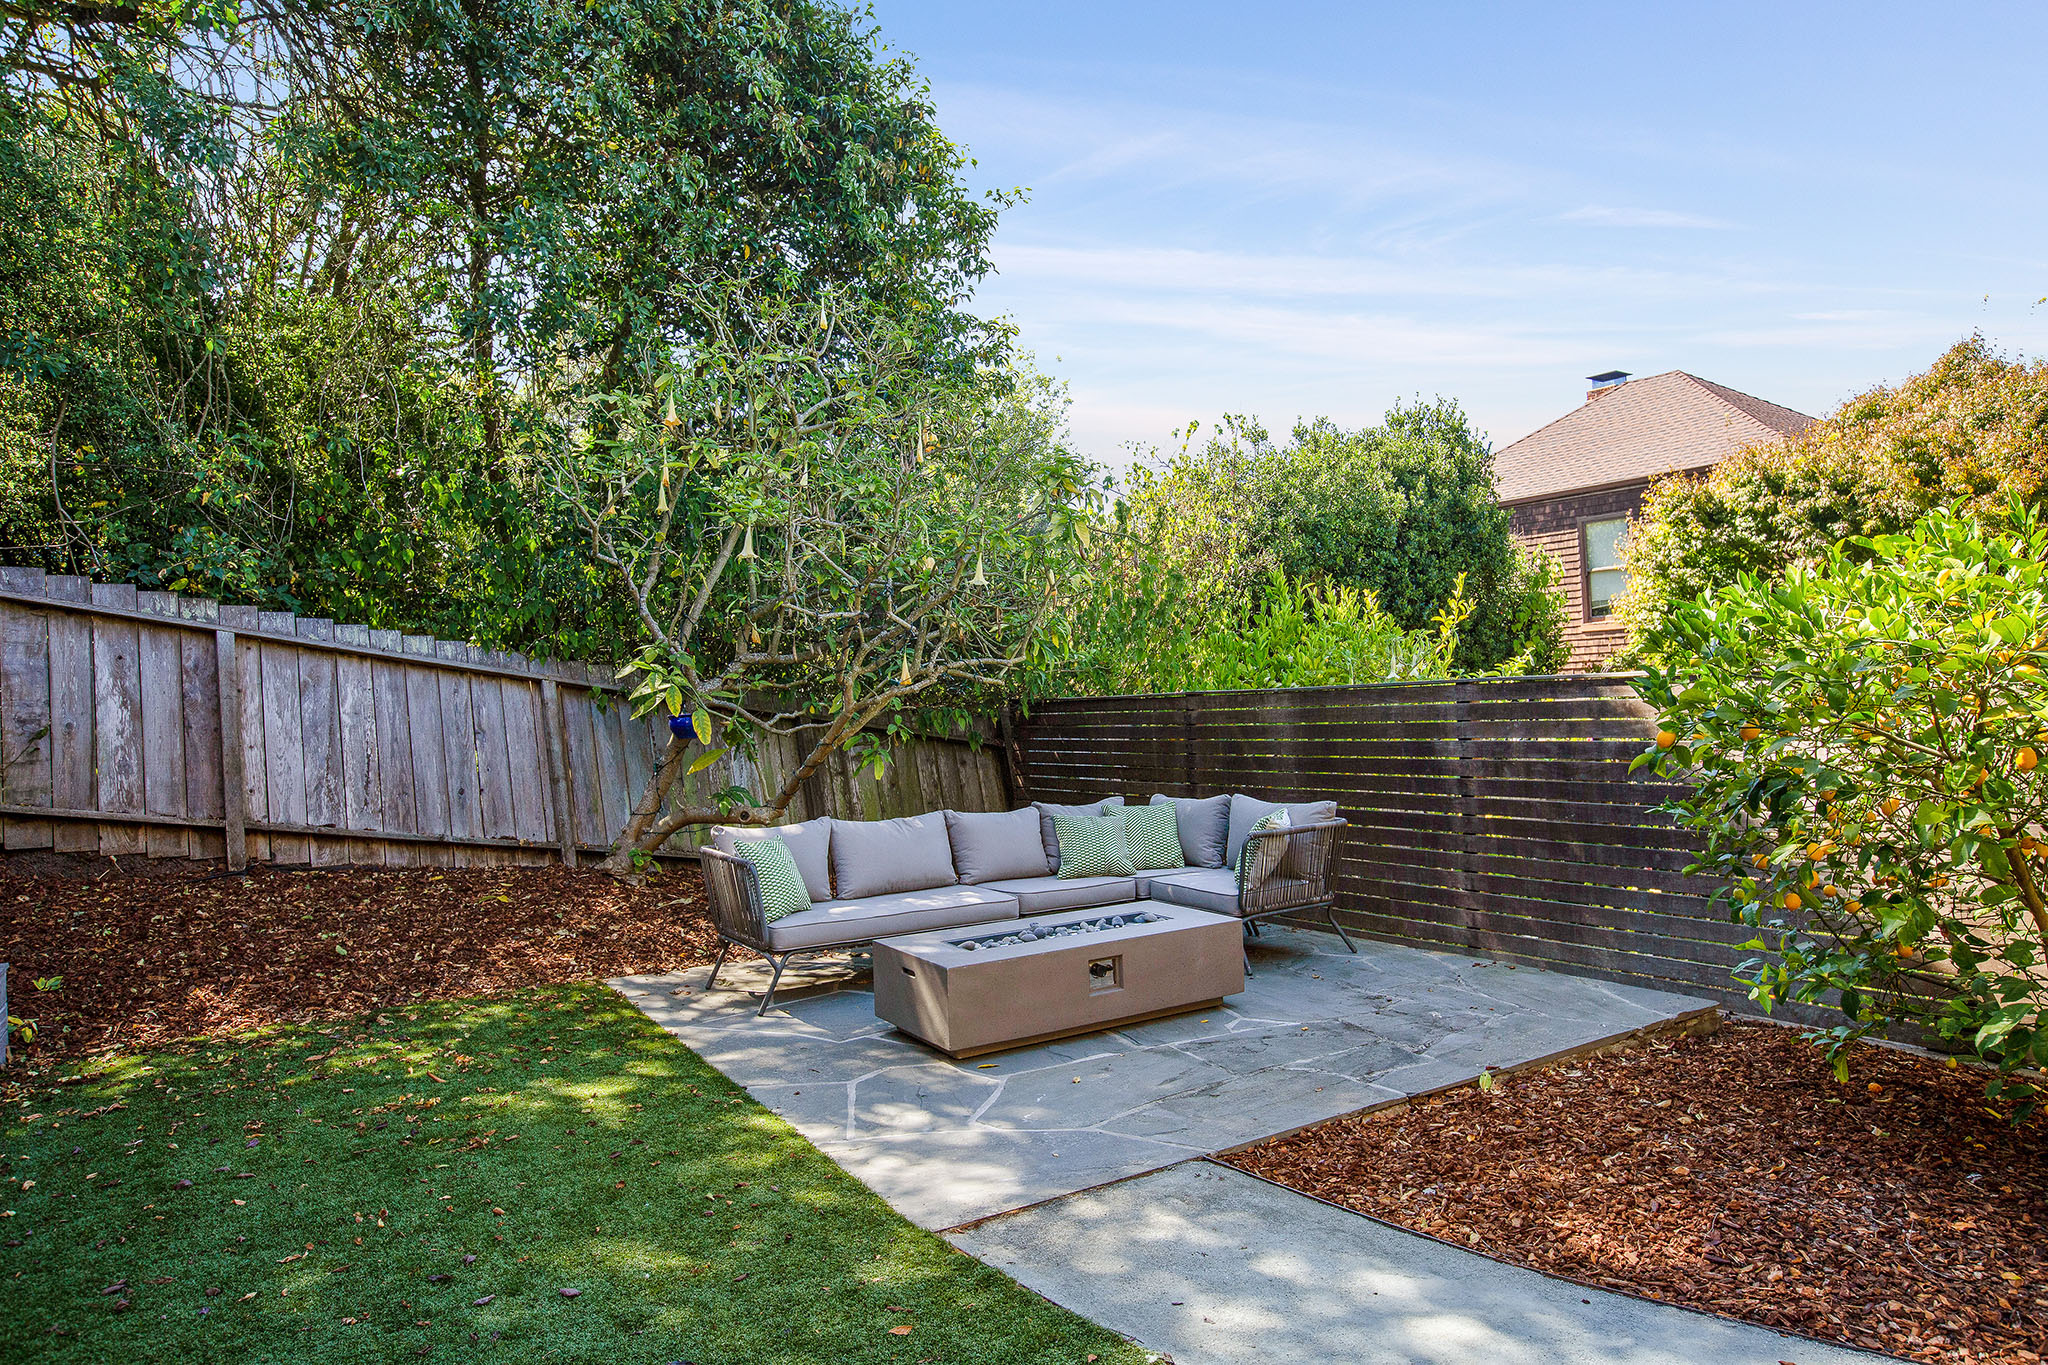 Property Photo: Back yard has cement pathway to sitting area. There are wood chip planter beds and a grass yard area. 